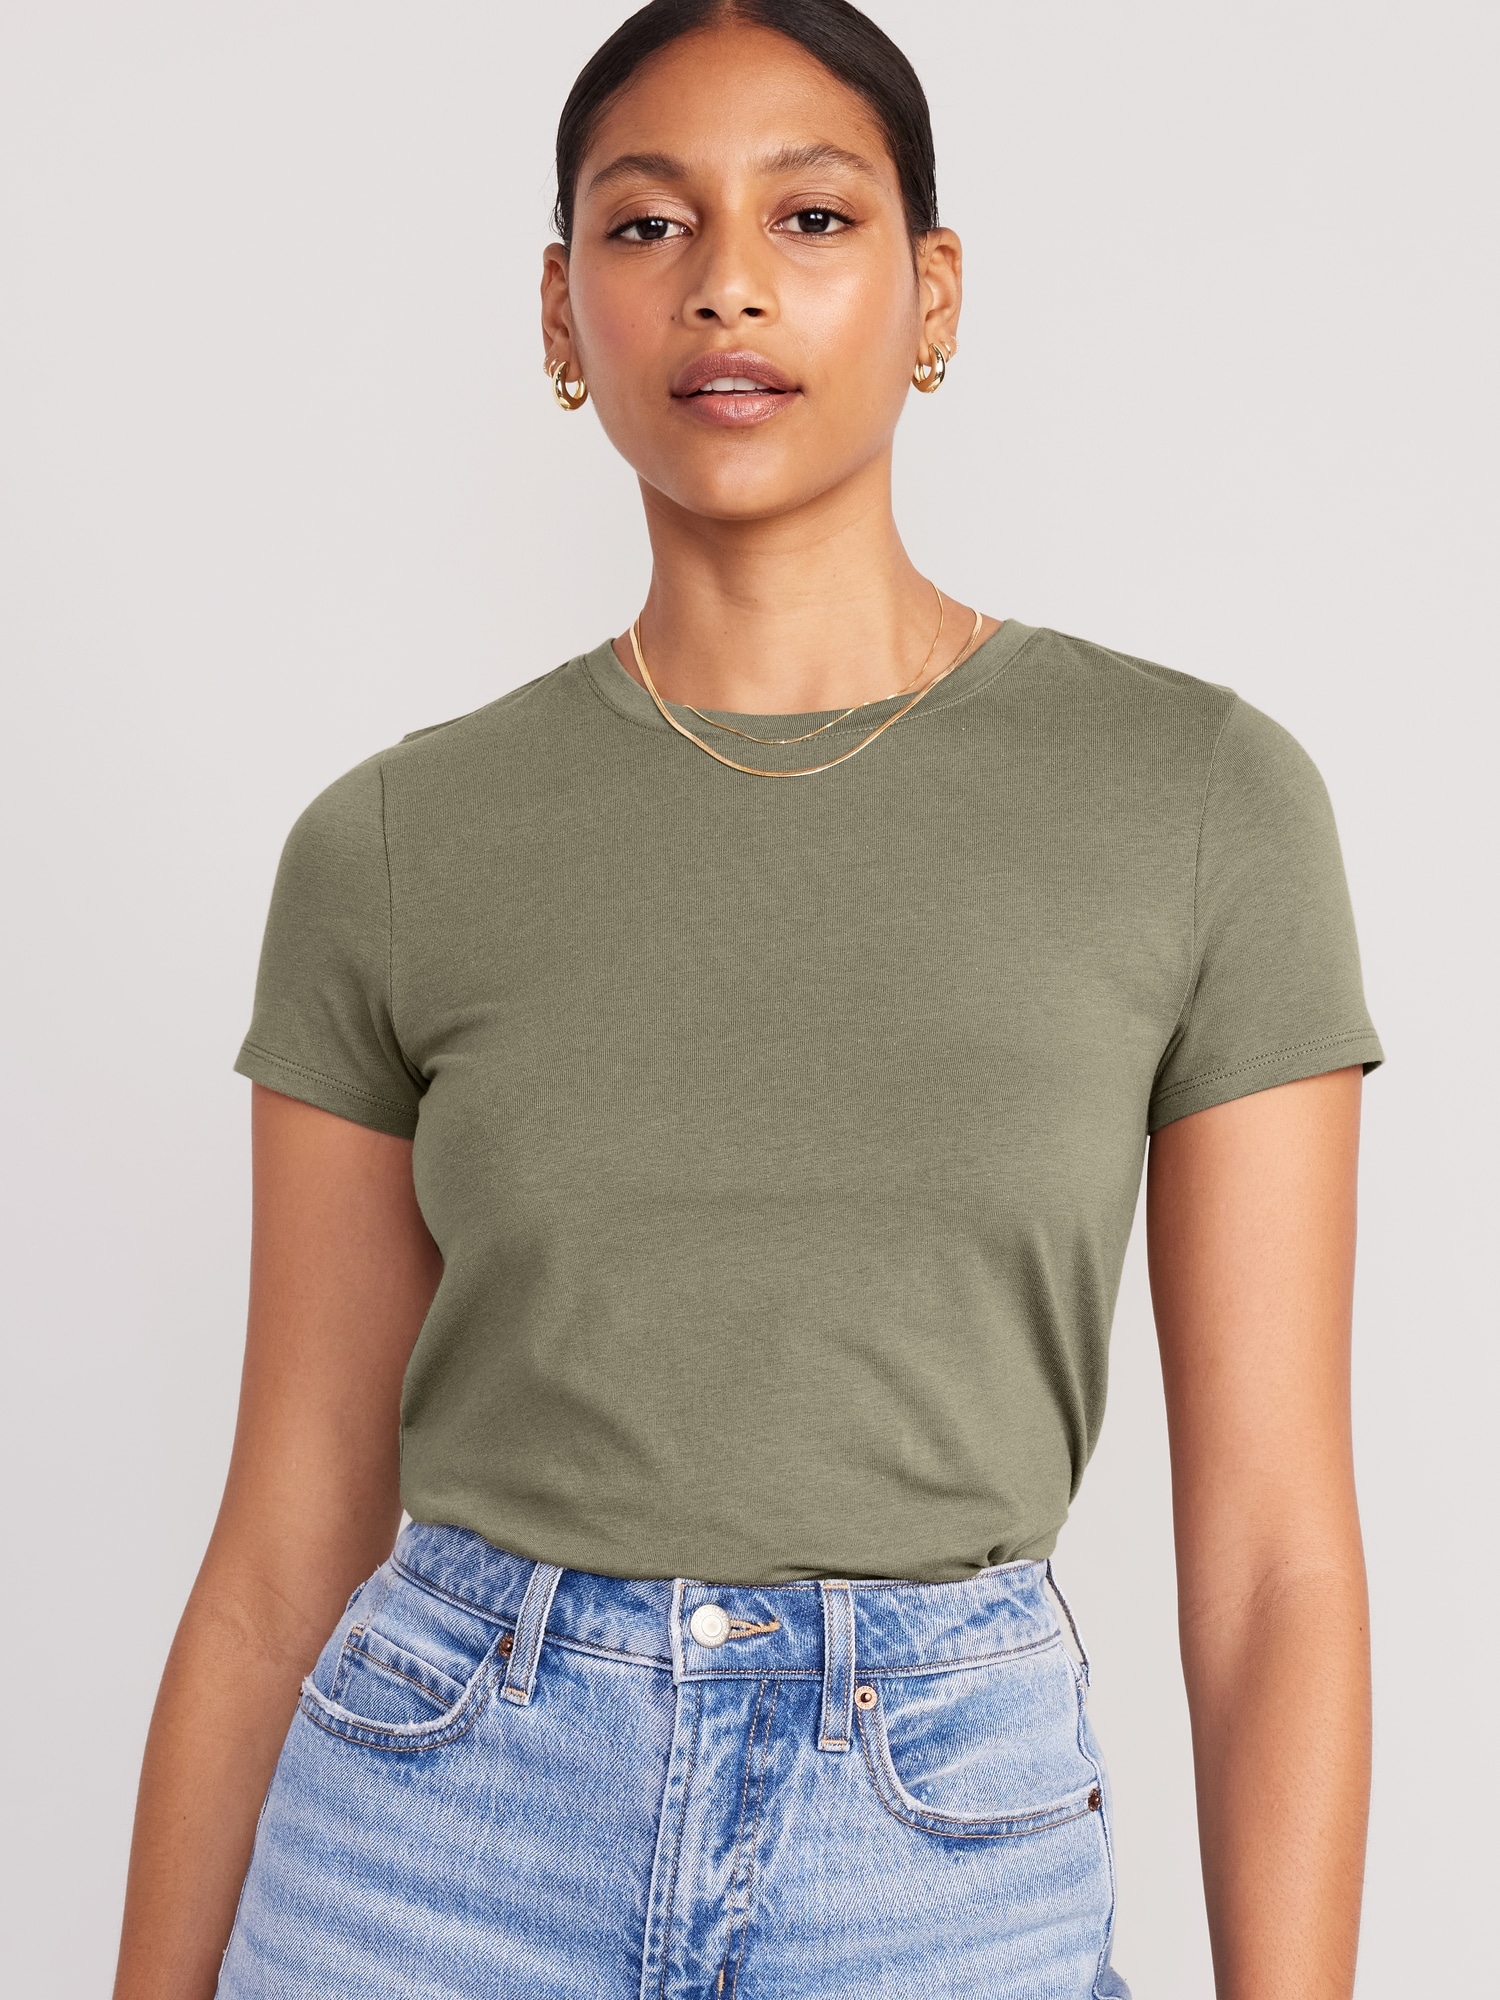 Crew Neck Shirts for Women